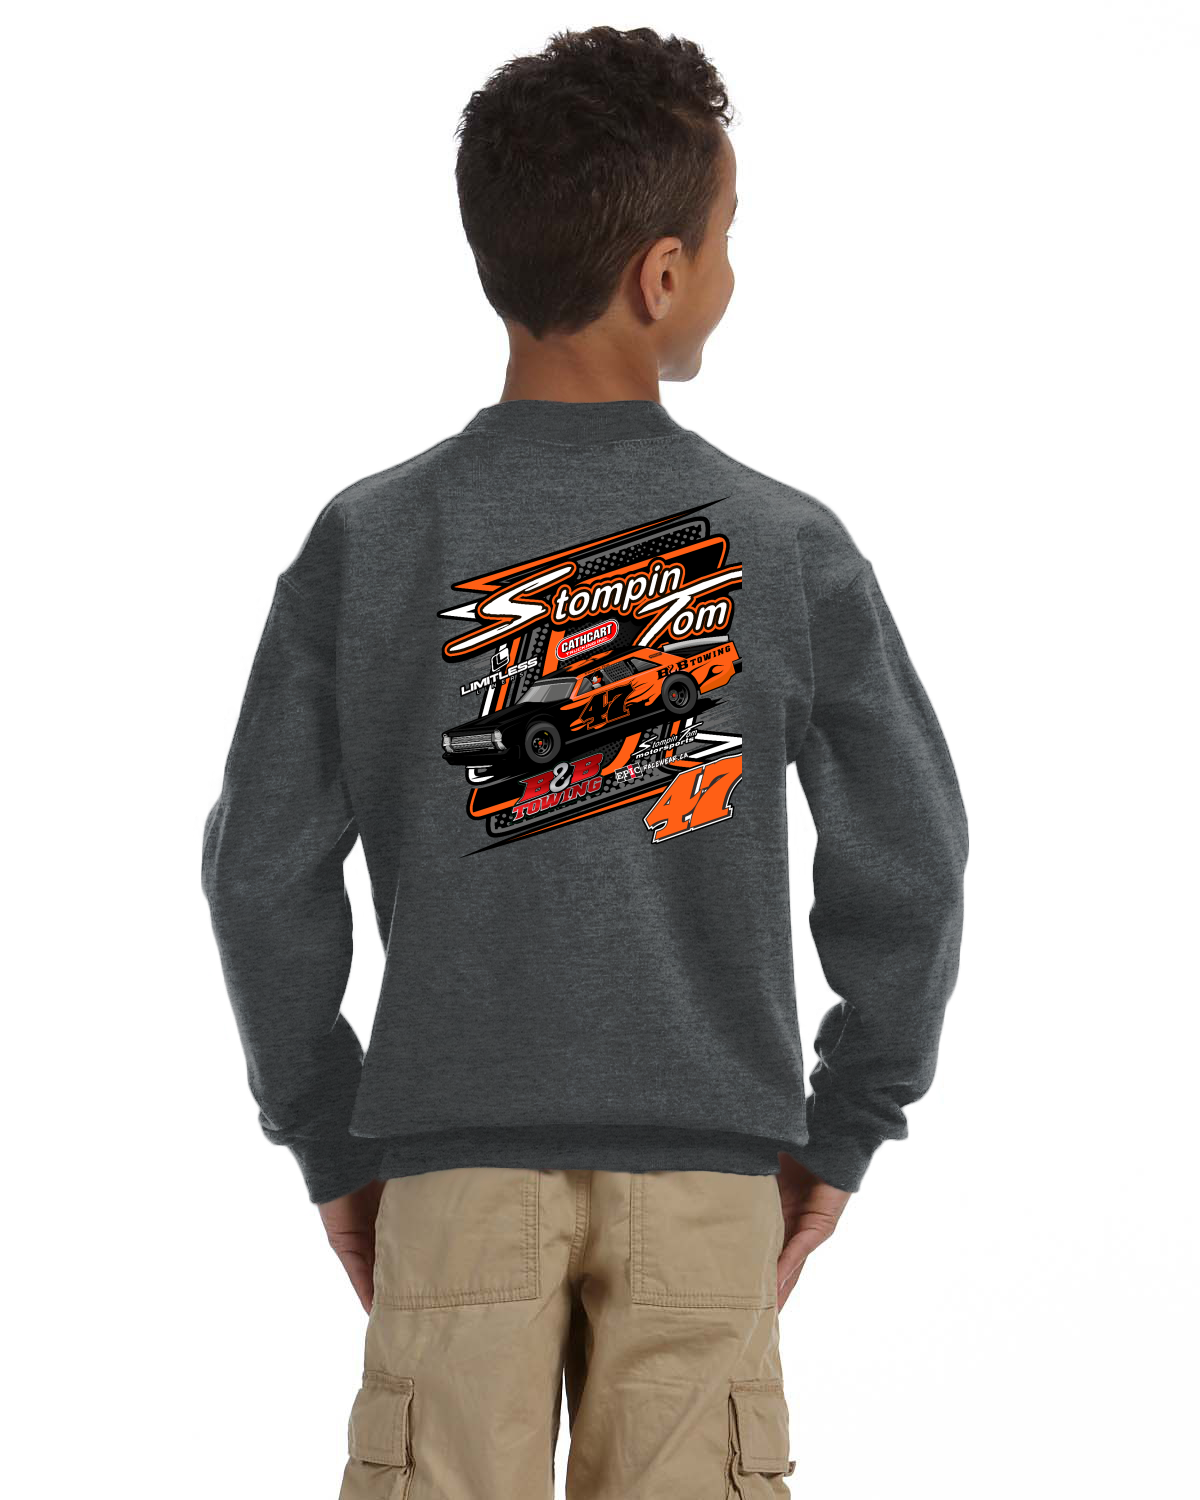 Stompin Tom Walters Racing Youth Crew neck sweater